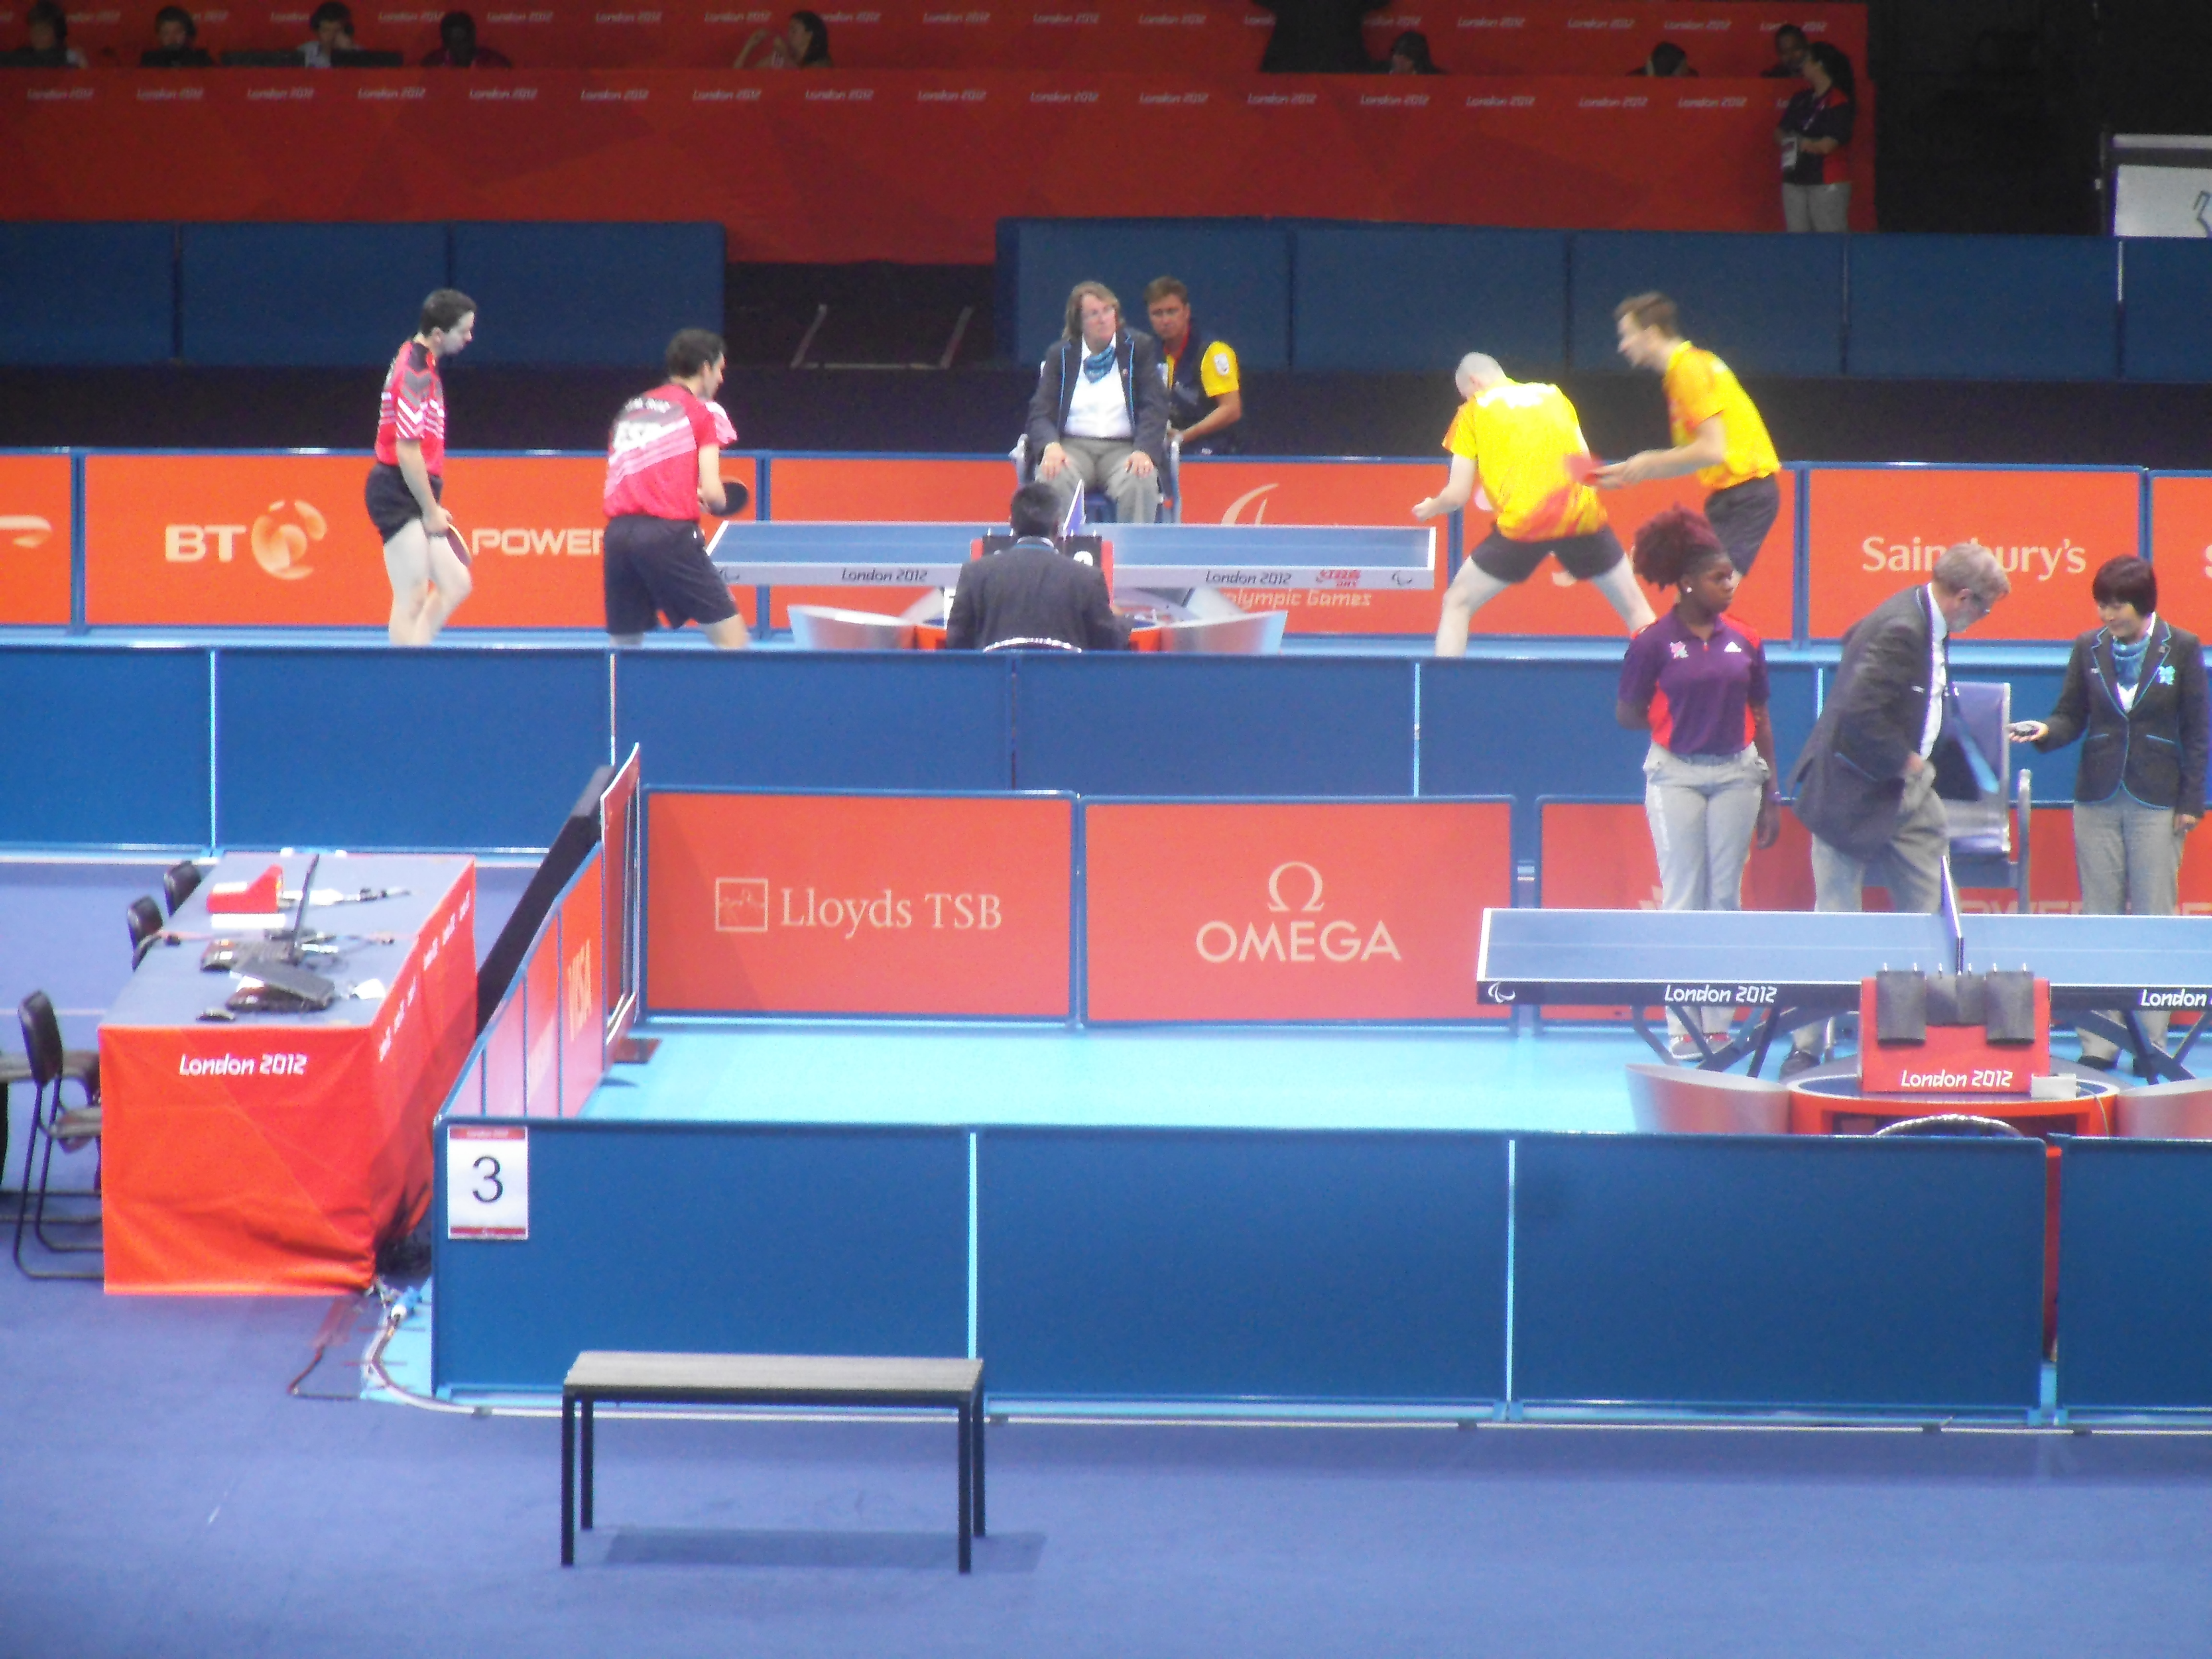 Table Tennis at Excel